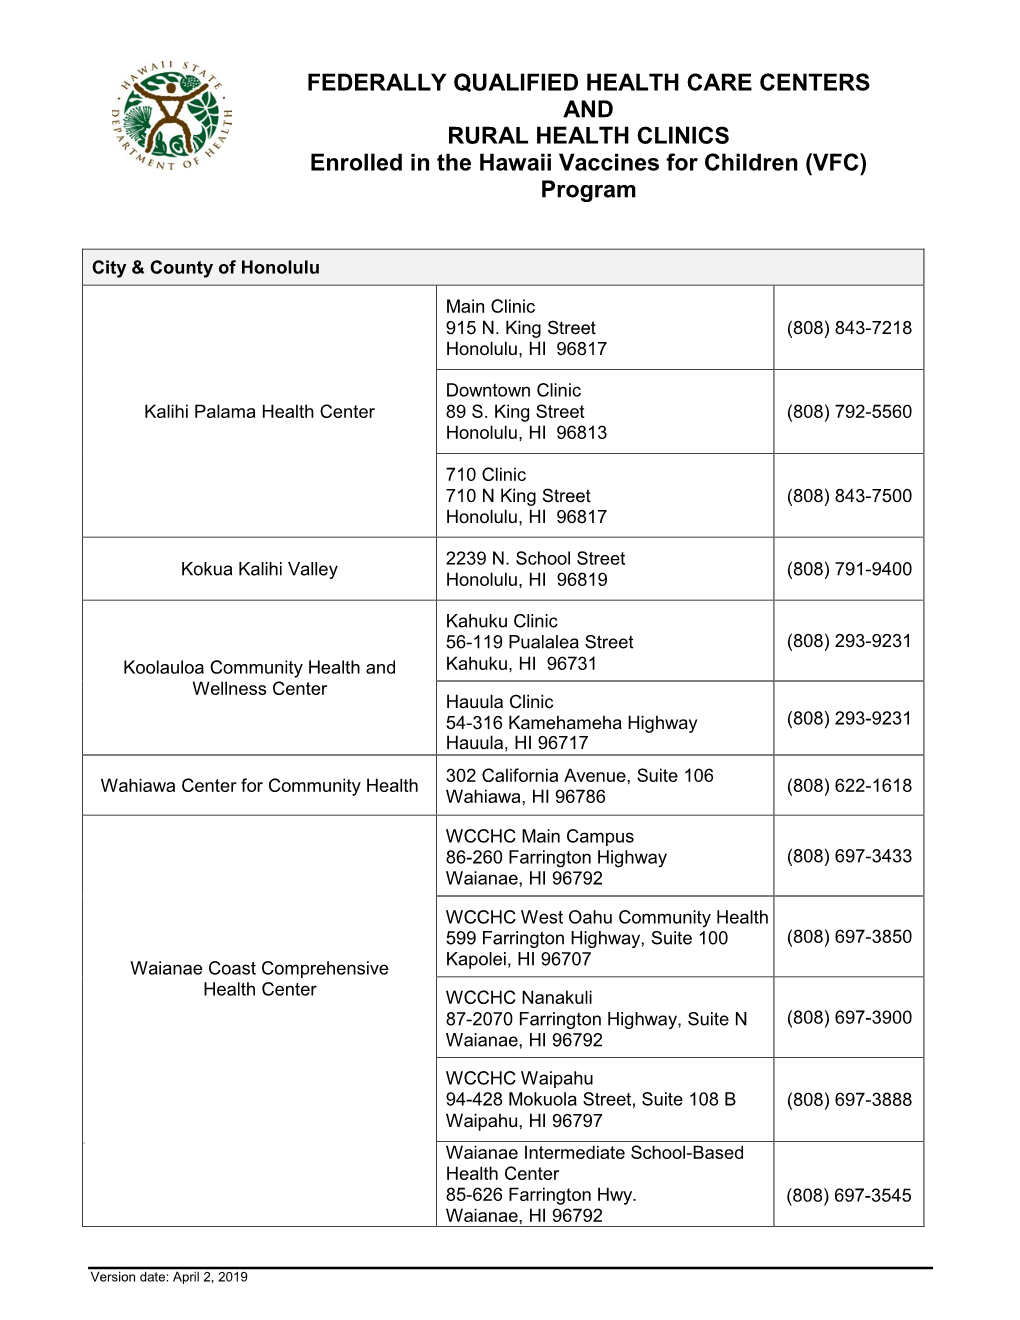 FEDERALLY QUALIFIED HEALTH CARE CENTERS and RURAL HEALTH CLINICS Enrolled in the Hawaii Vaccines for Children (VFC) Program